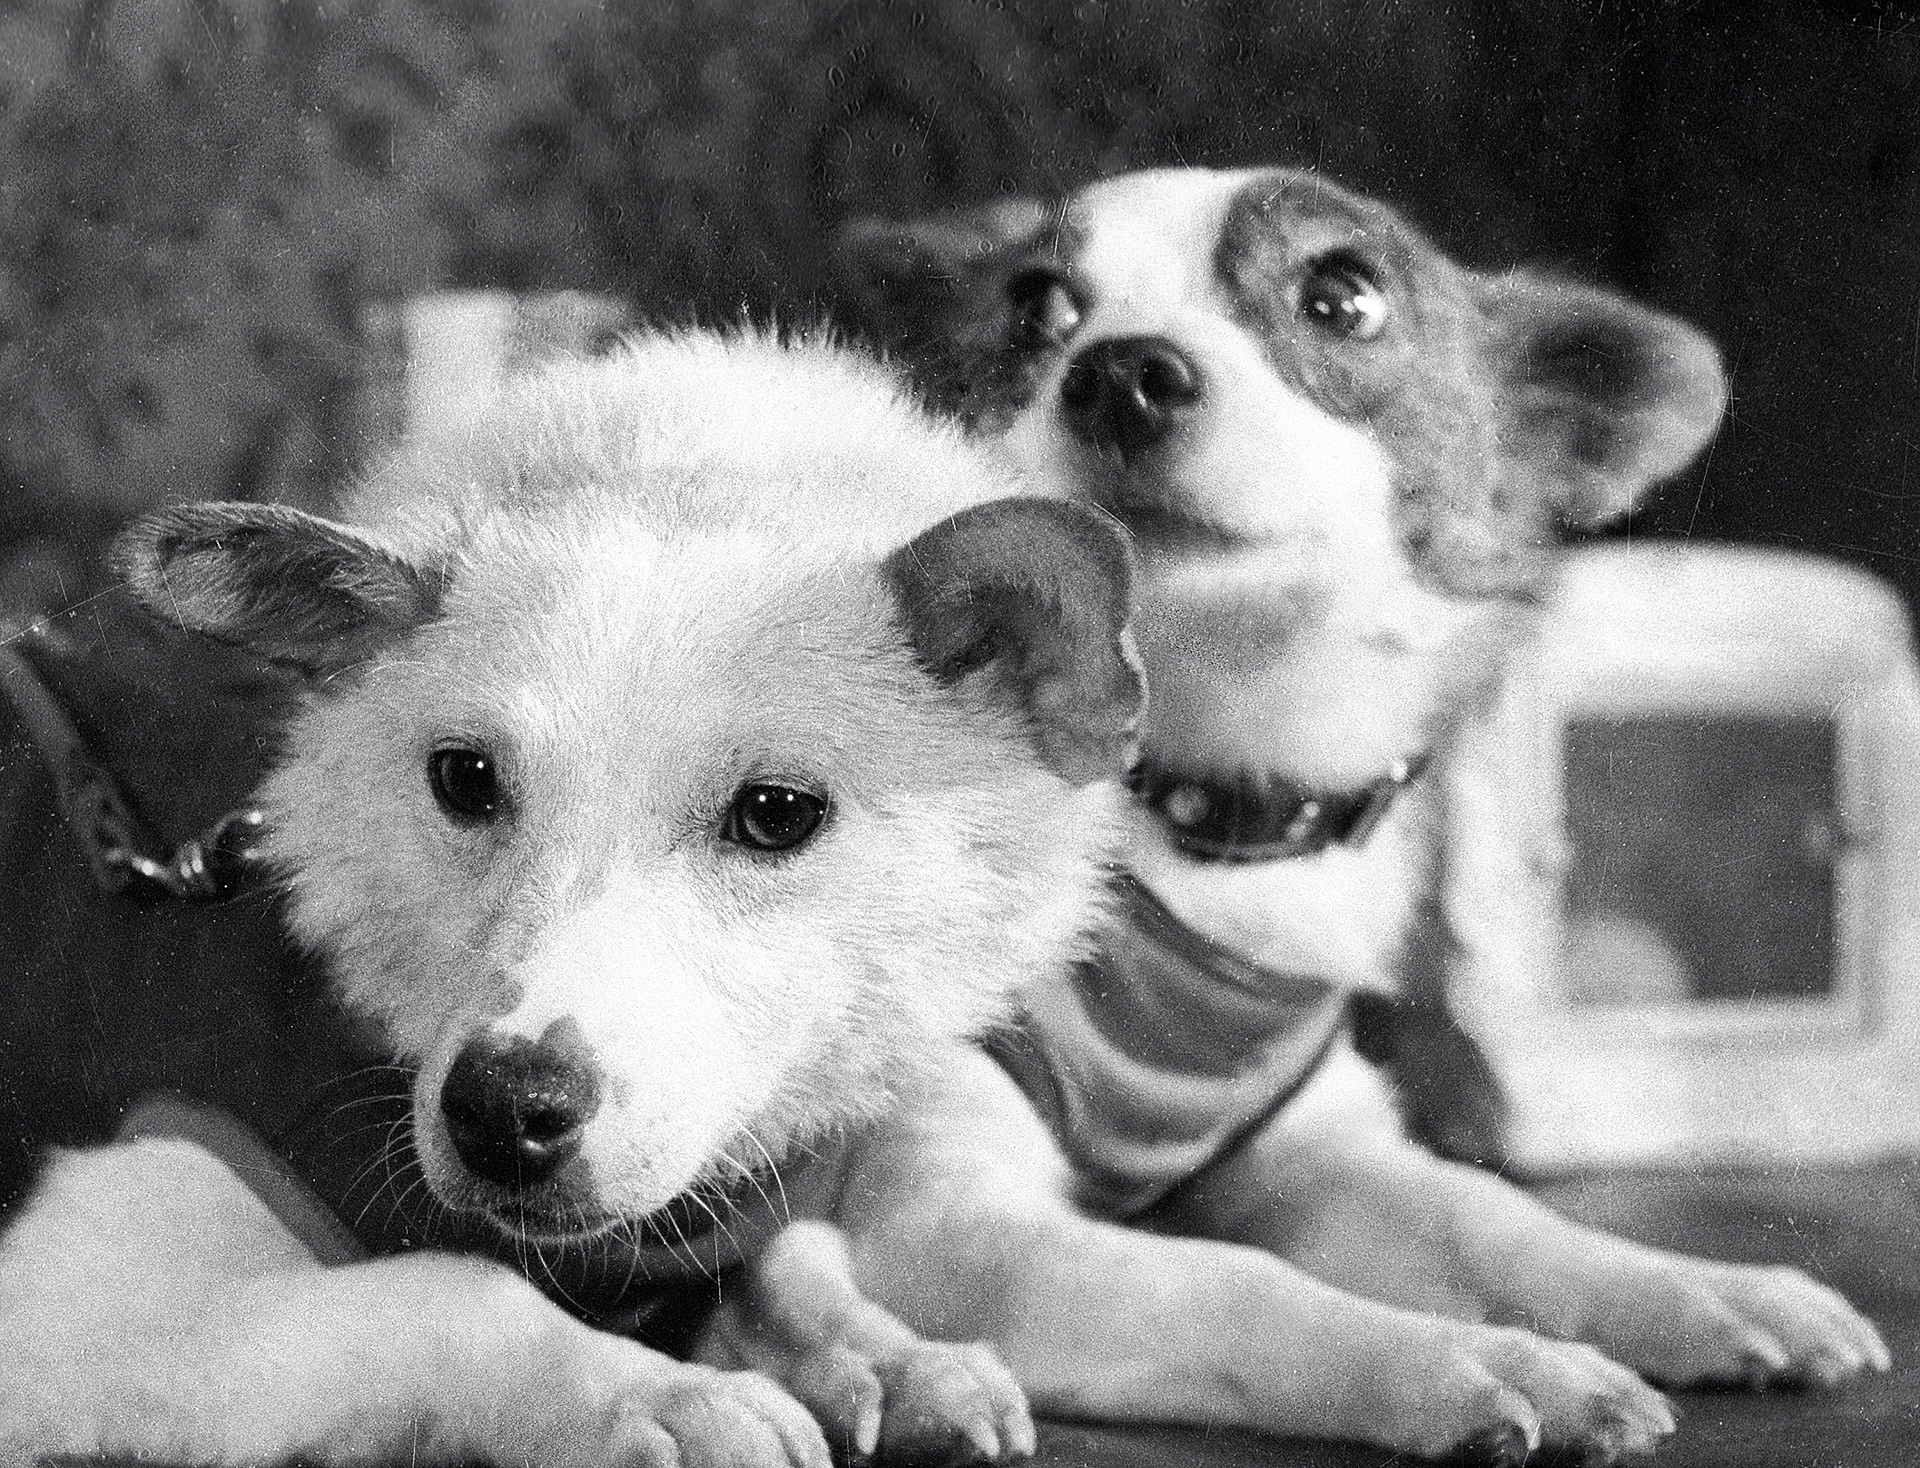 Belka and Strelka. Strelka, Pushinka's mother, is on the right.